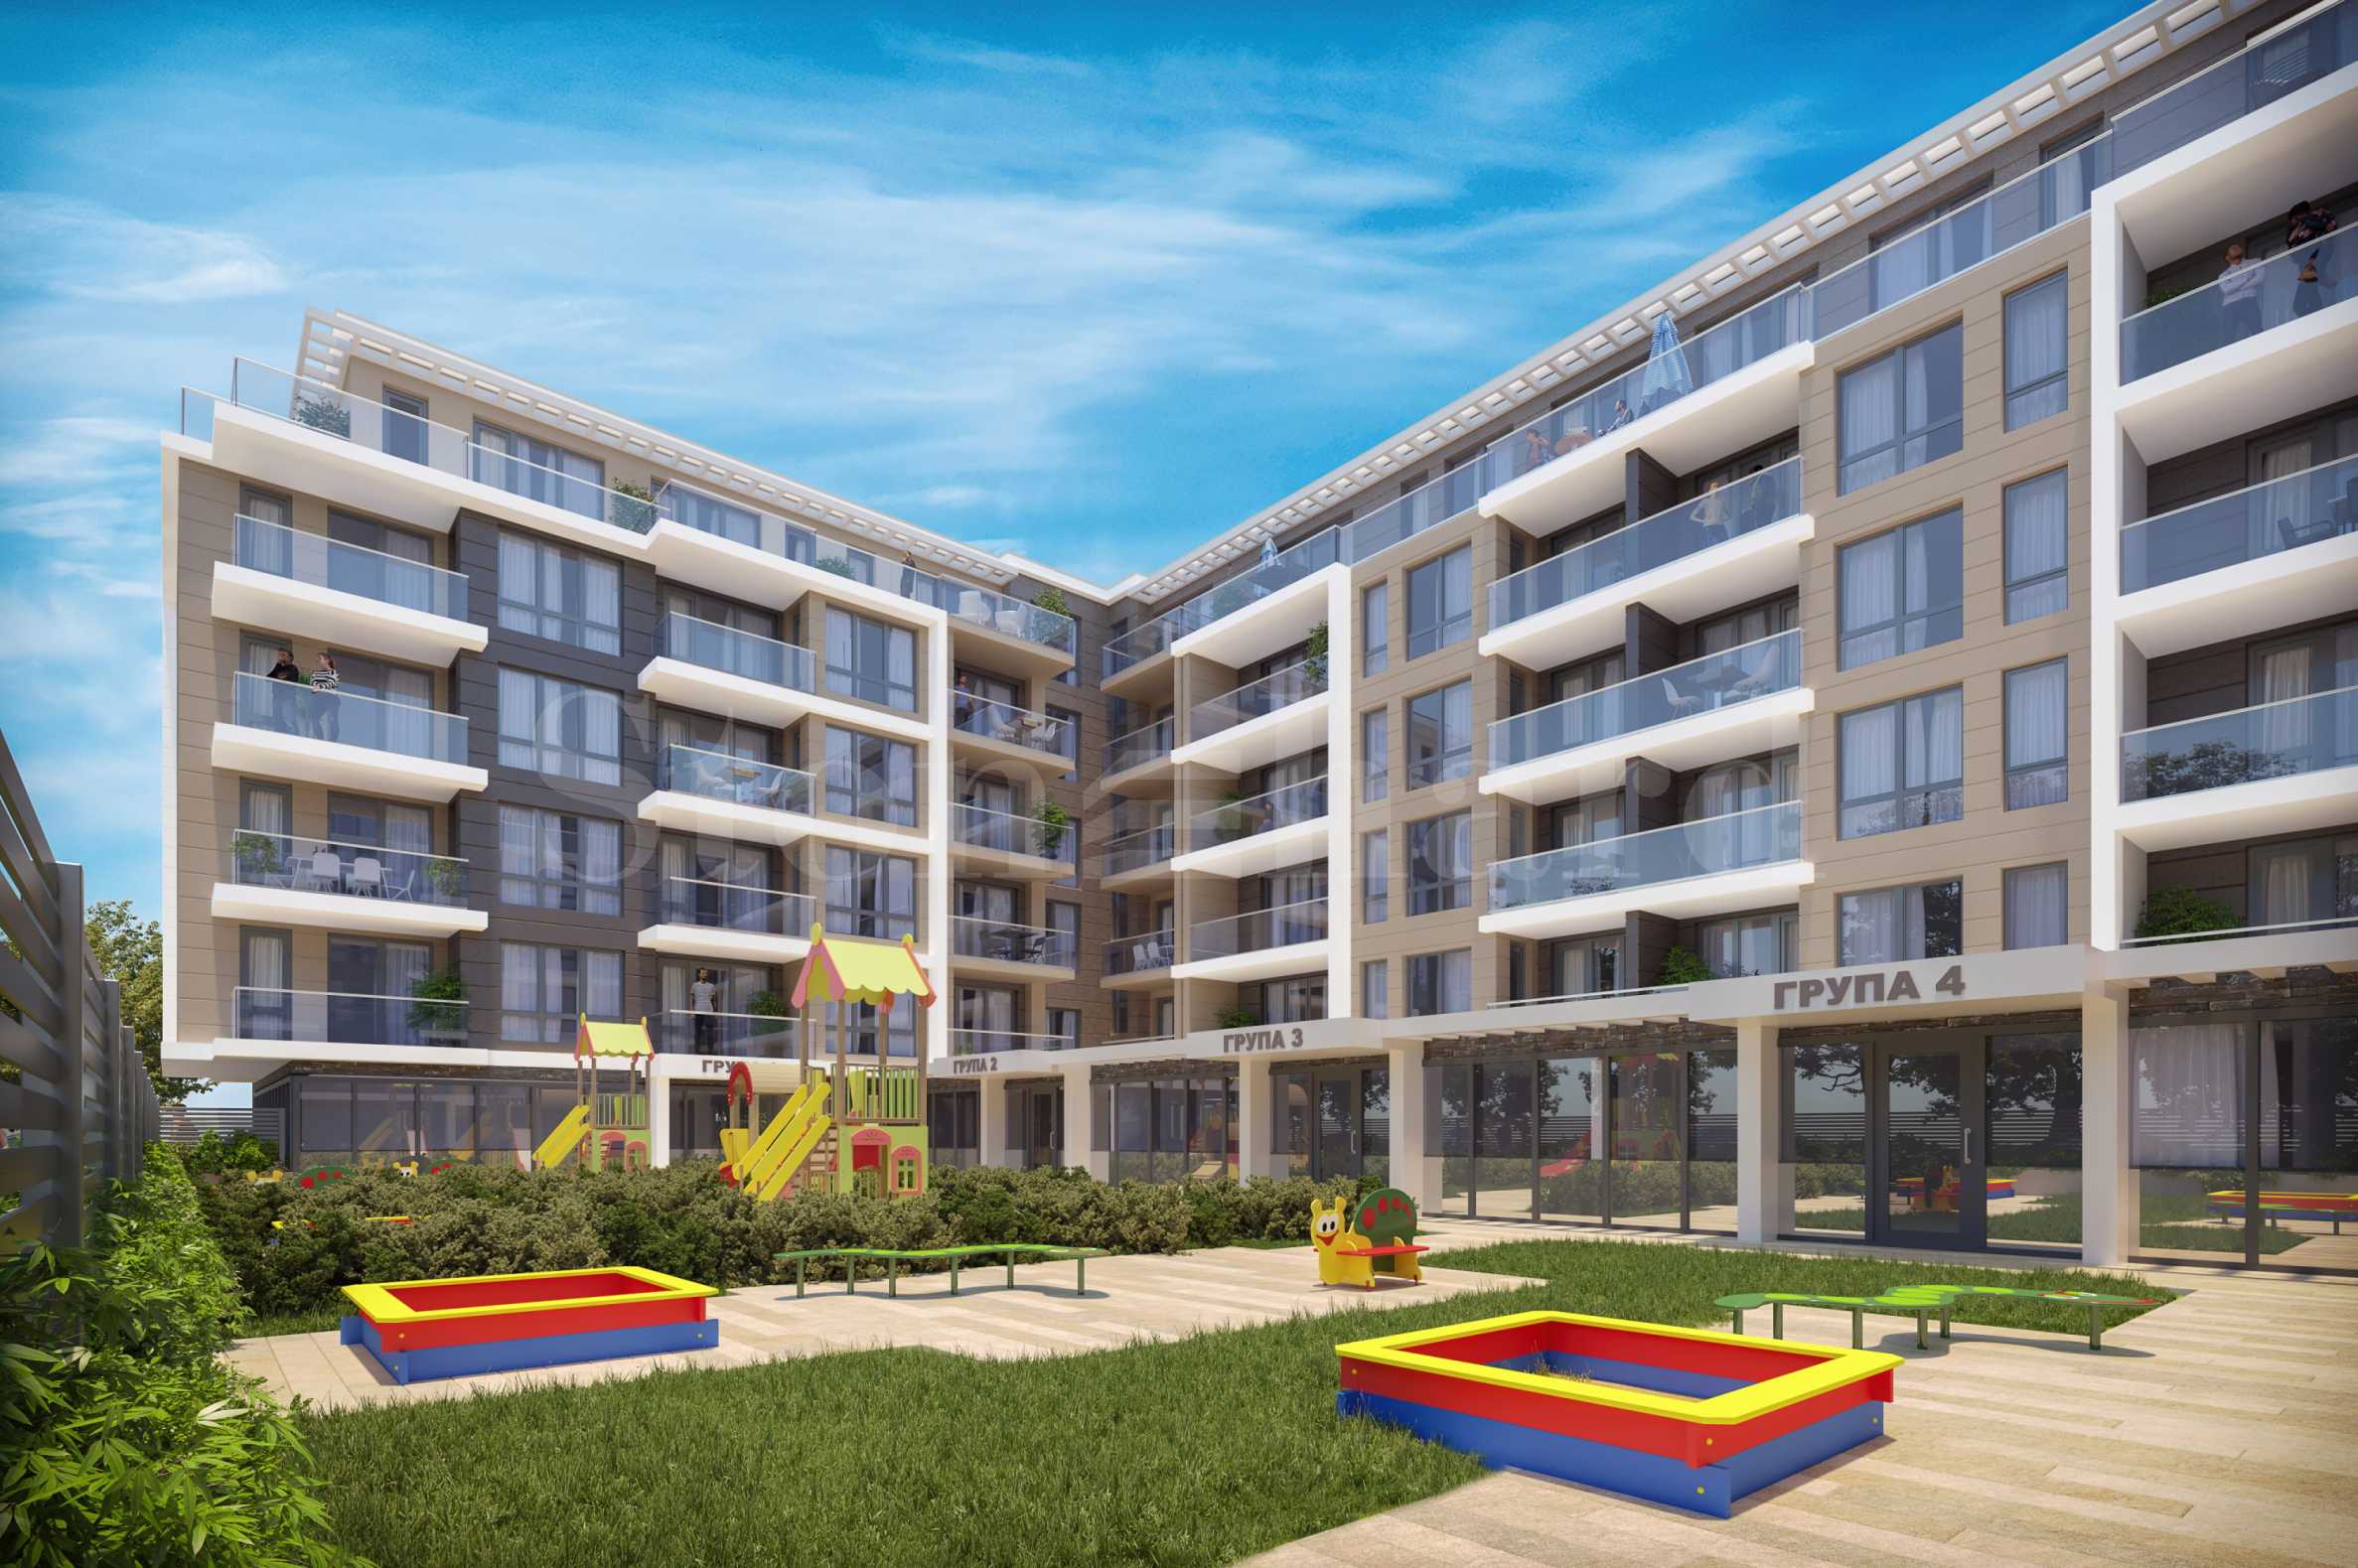 New apartments in a modern complex in Plovdiv1 - Stonehard